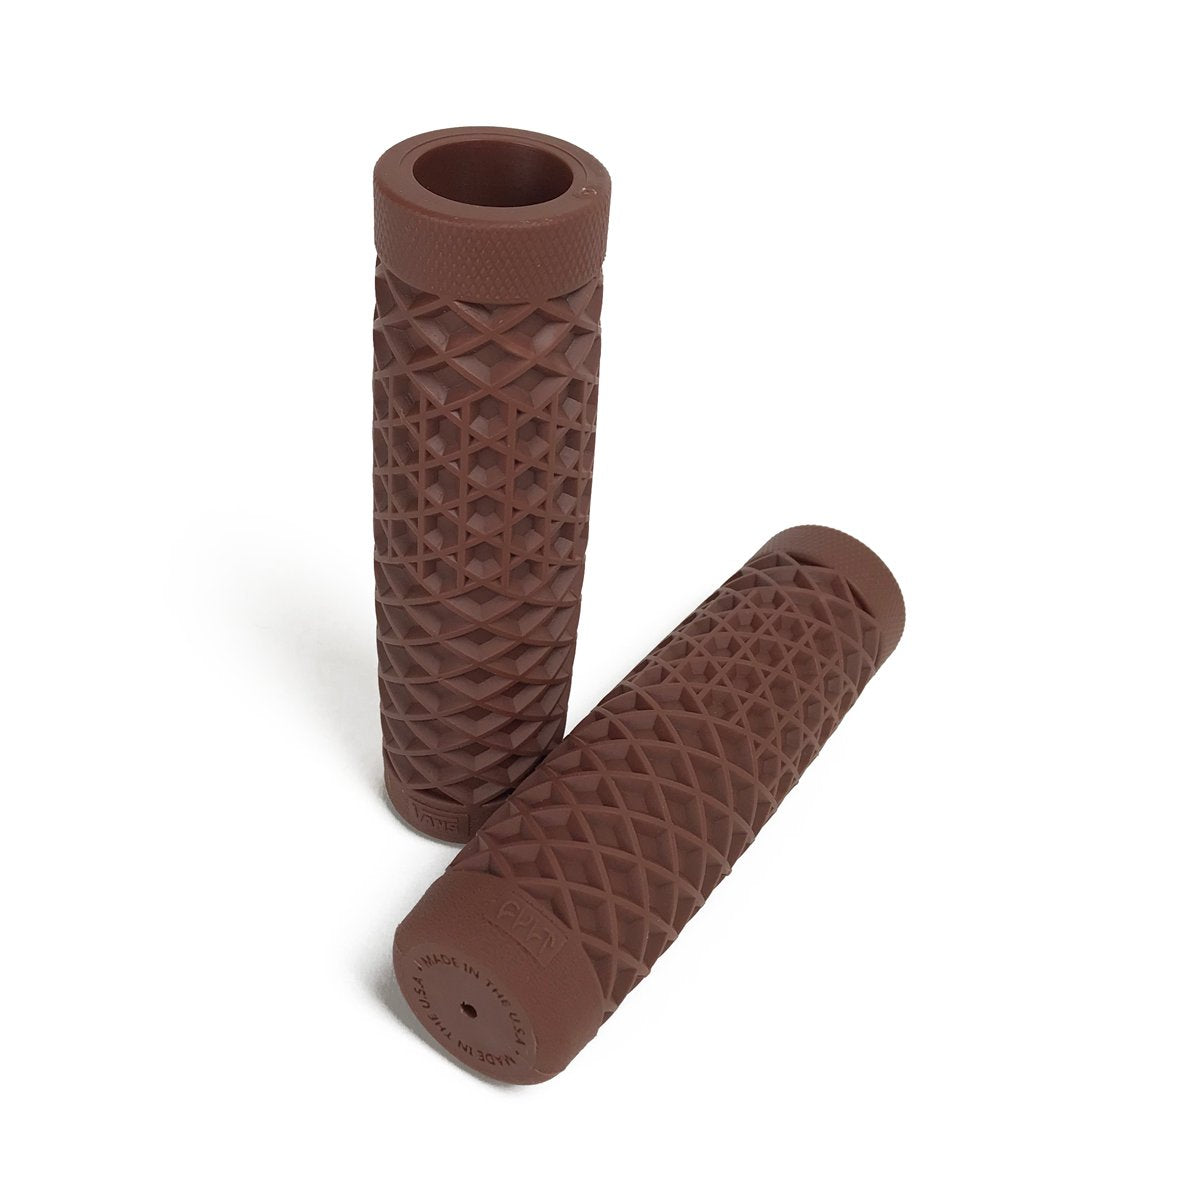 A pair of Vans + Cult Motorcycle Grips - 7/8" Brown on a white background.